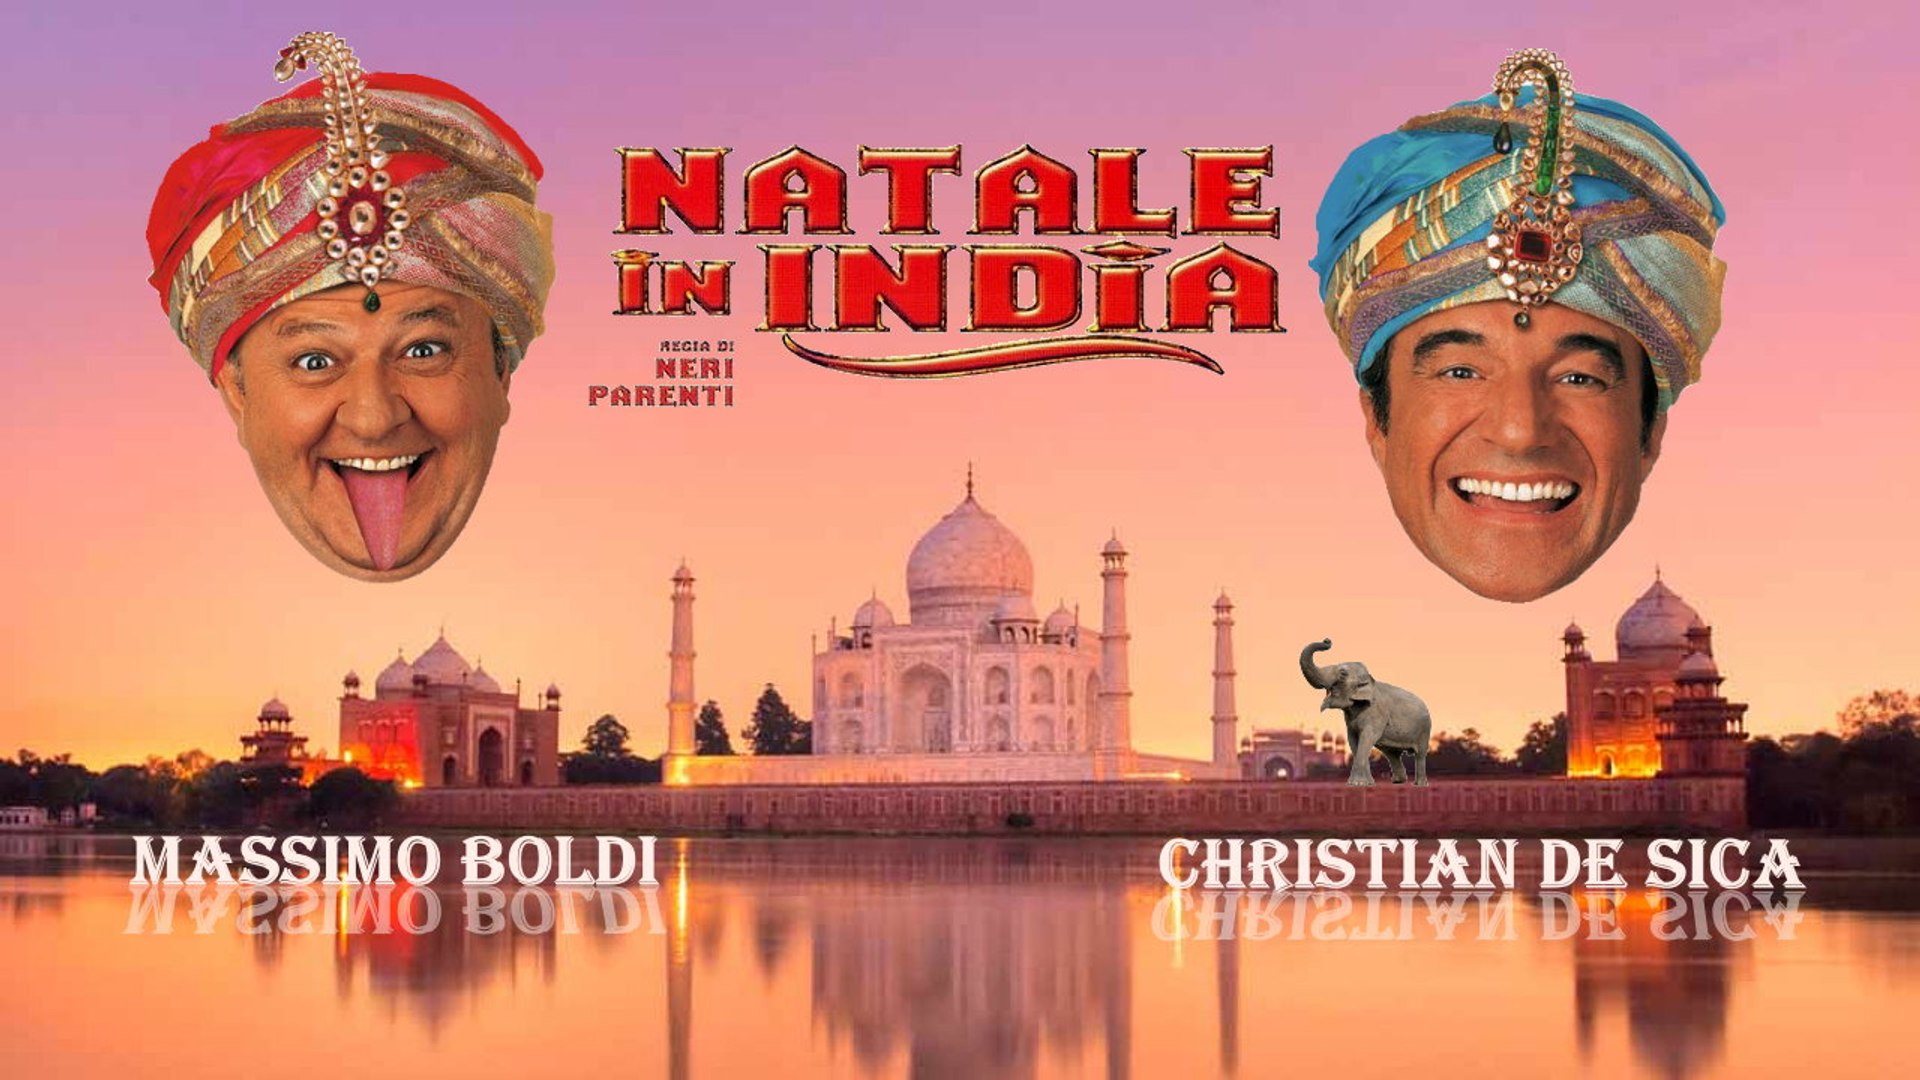 Natale in India (2003) Full HD - Video Dailymotion